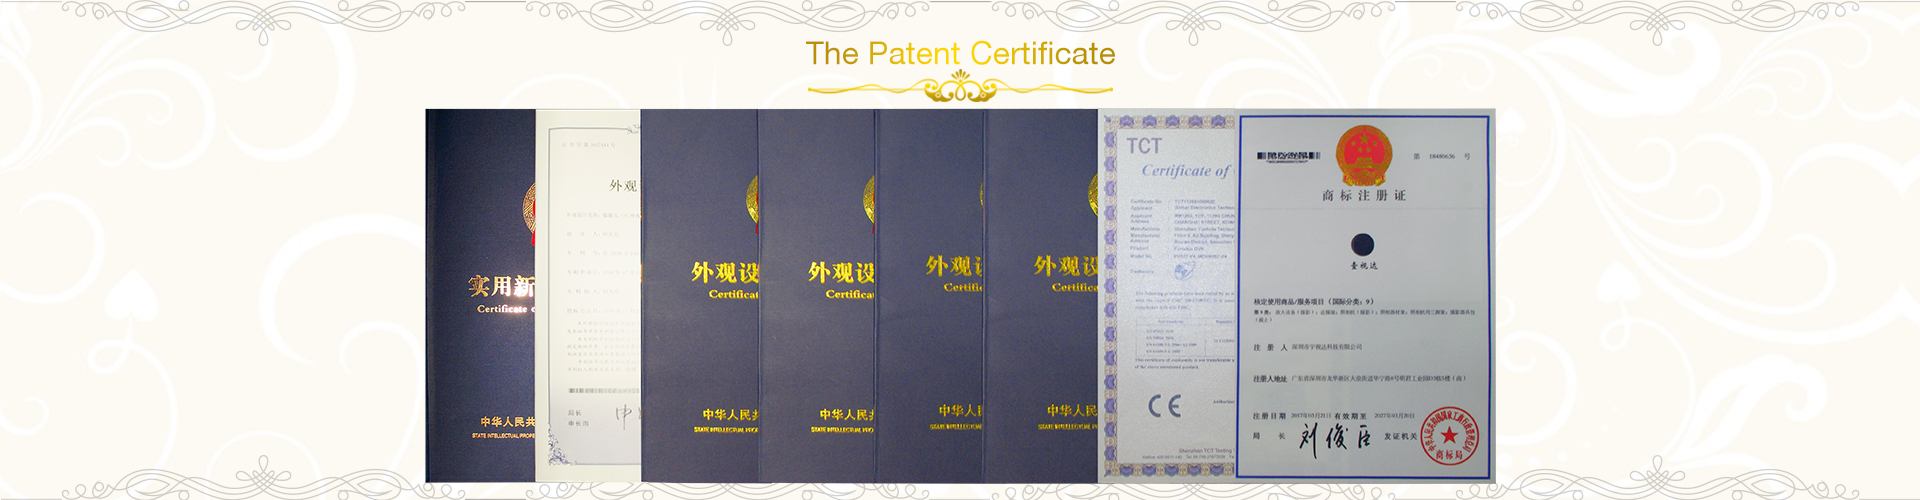 the patent certificate